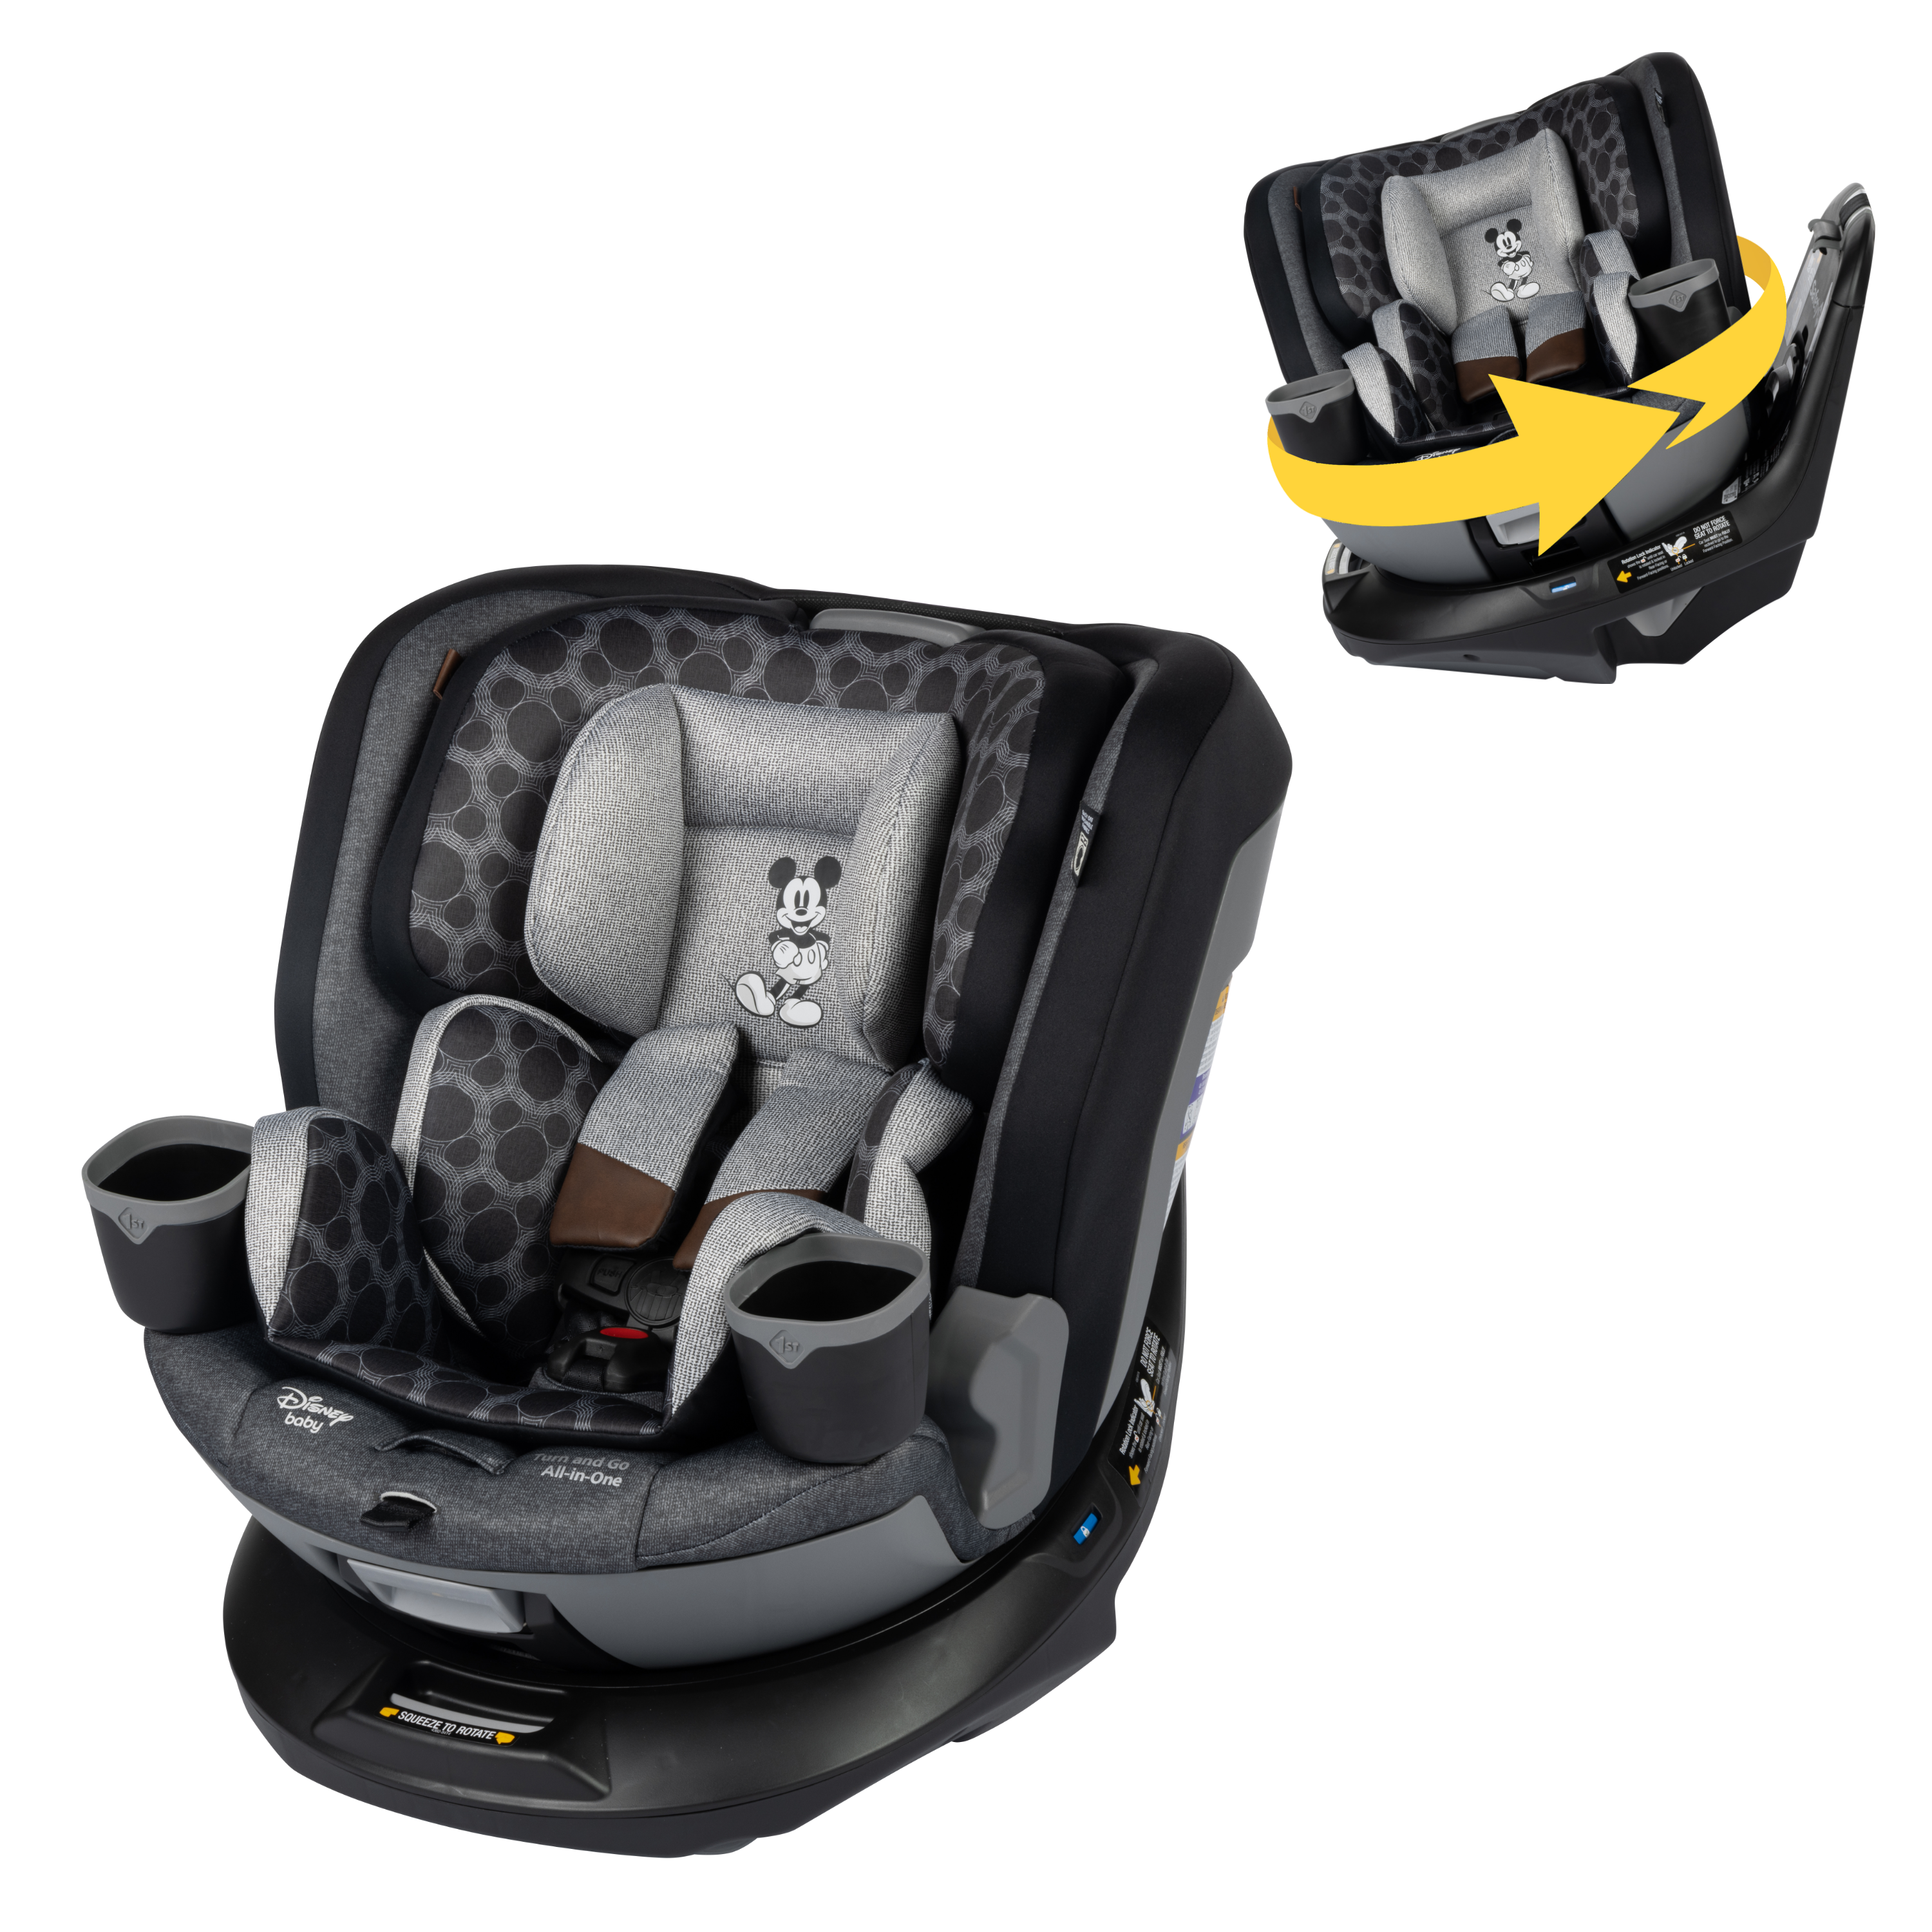 Disney Baby Turn and Go 360 Rotating All-in-One Convertible Car Seat - Vintage Disney